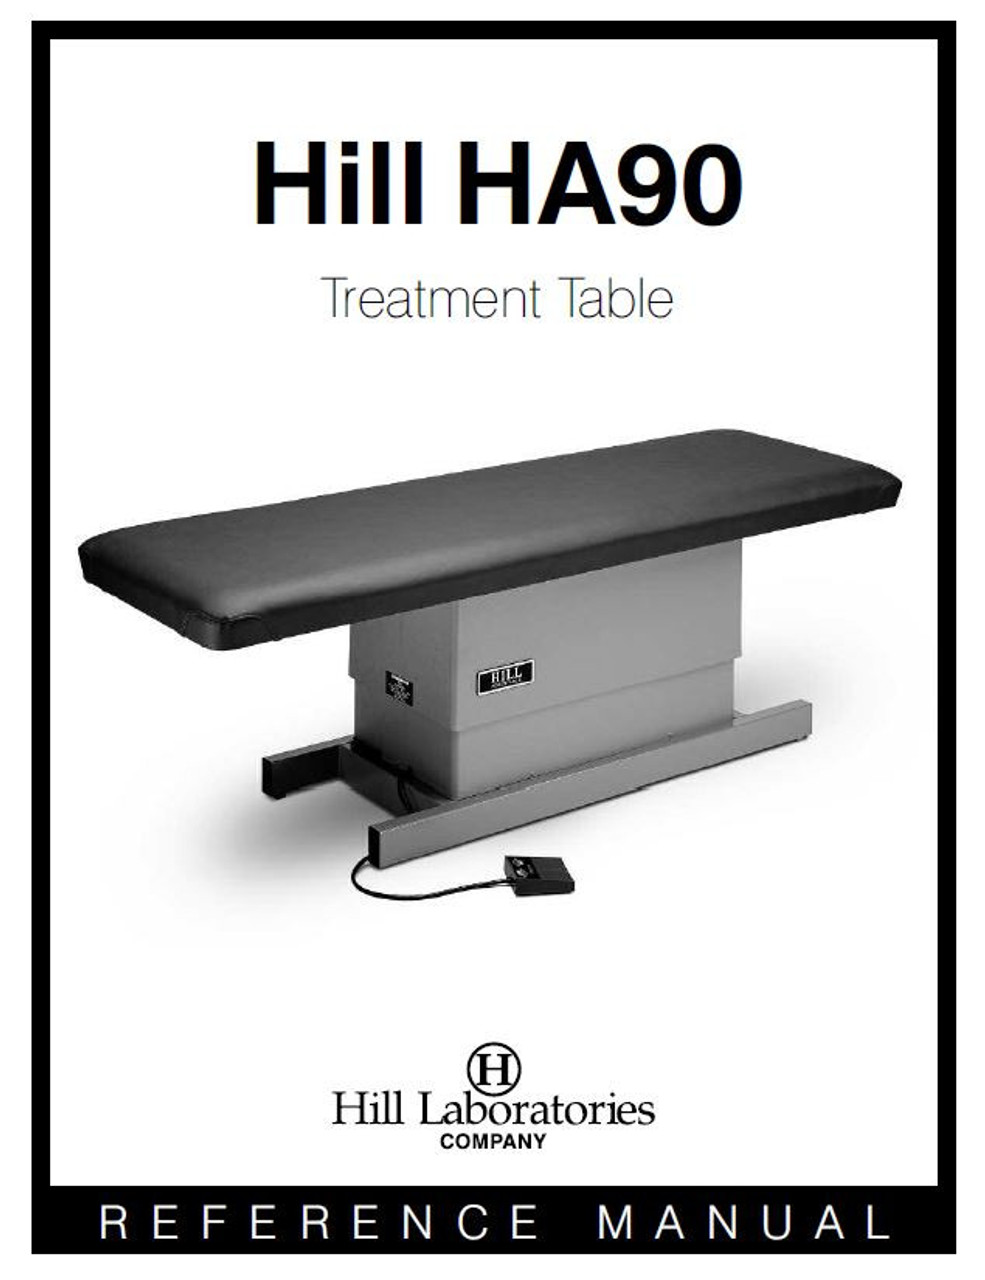 Looking for Hill HA90 Owner's Manual, Hill HA90 Owners Manual, HA90 Manual, Hill manuals, Hill table, hill chiropractic table?